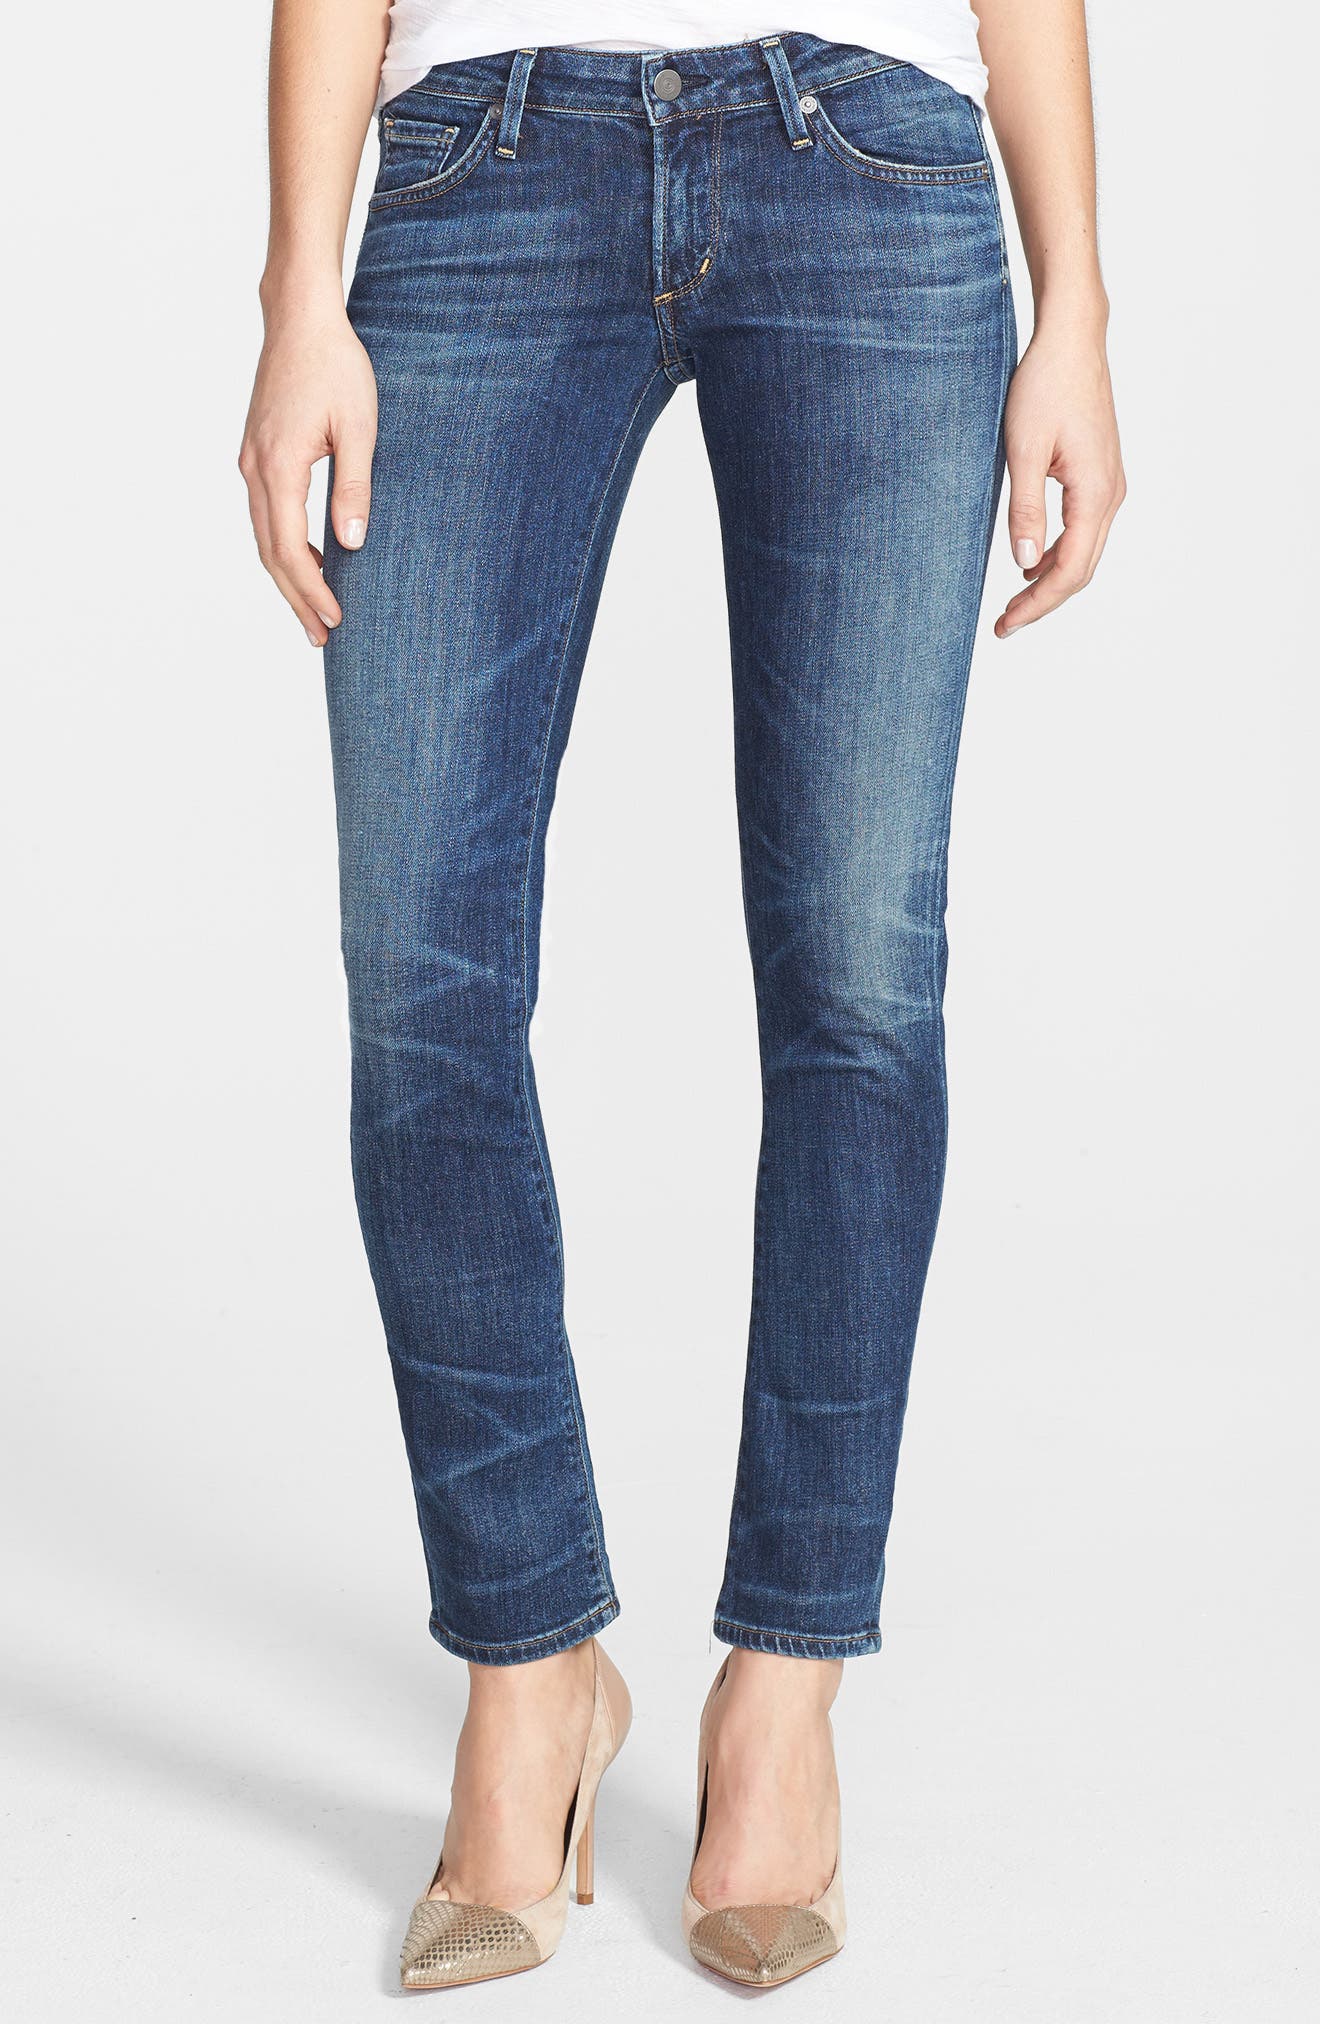 citizen of humanity racer jeans